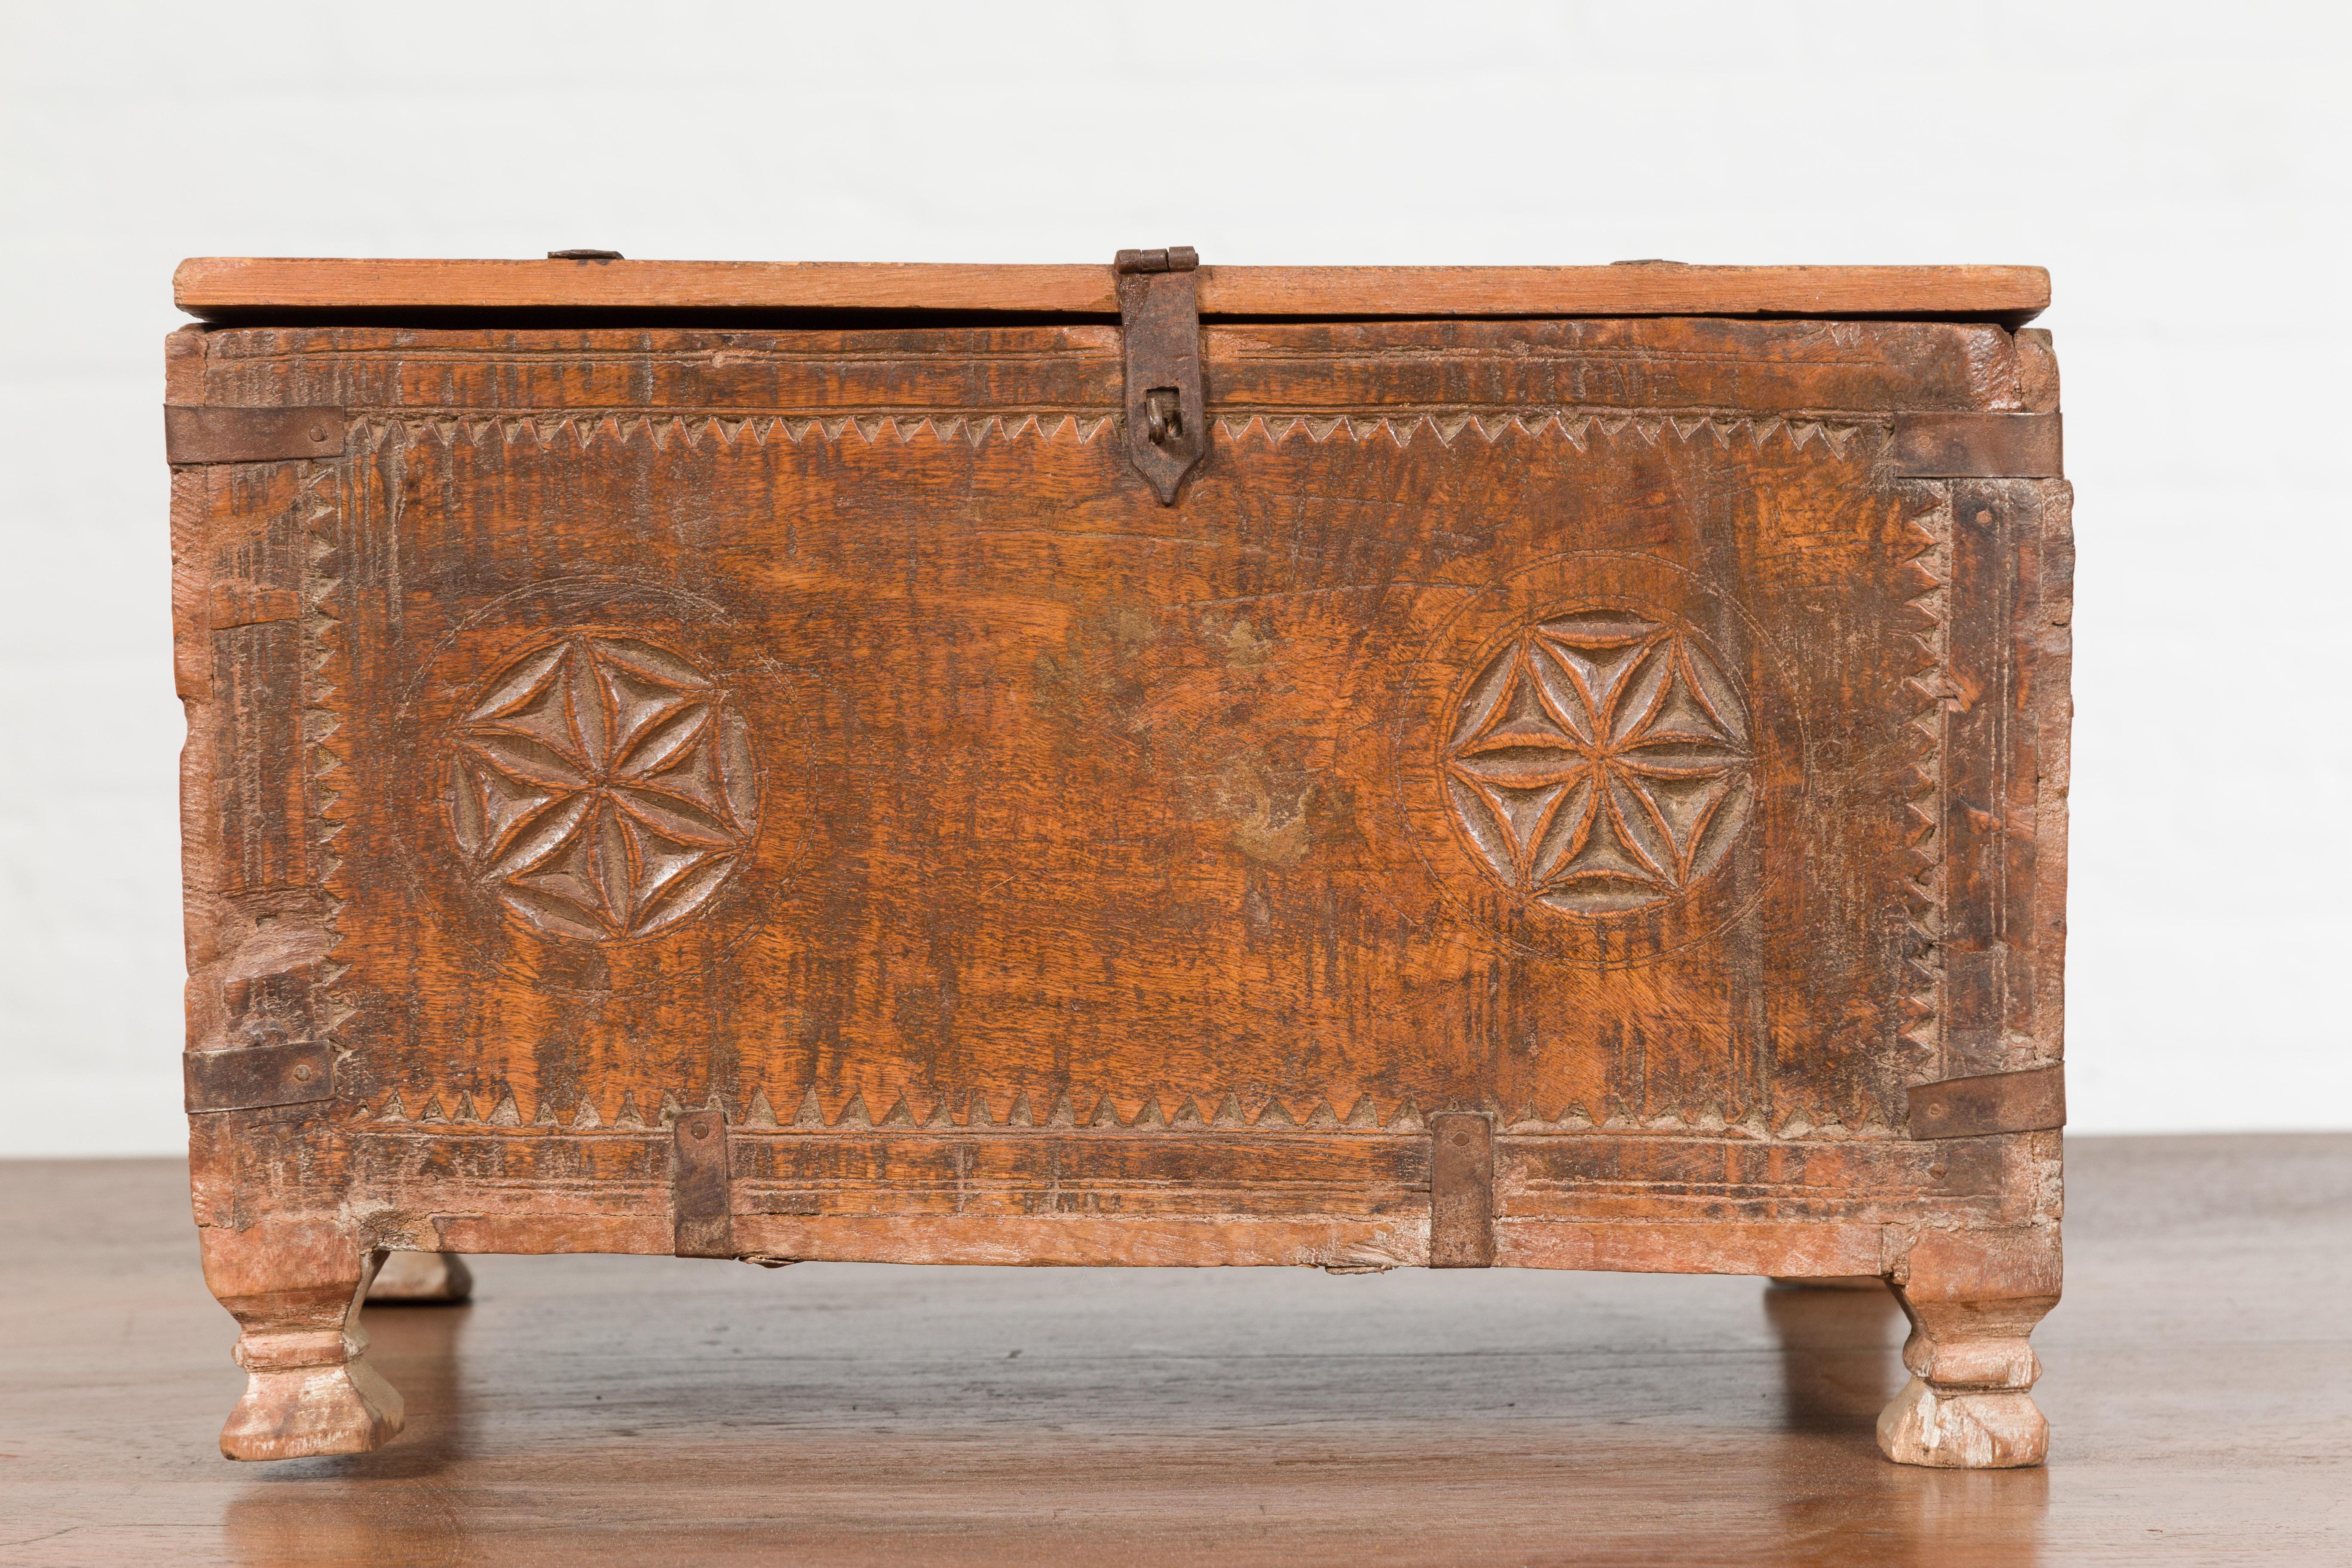 Indian 19th Century Small Wooden Box with Iron Hardware and Carved Rosacea For Sale 3